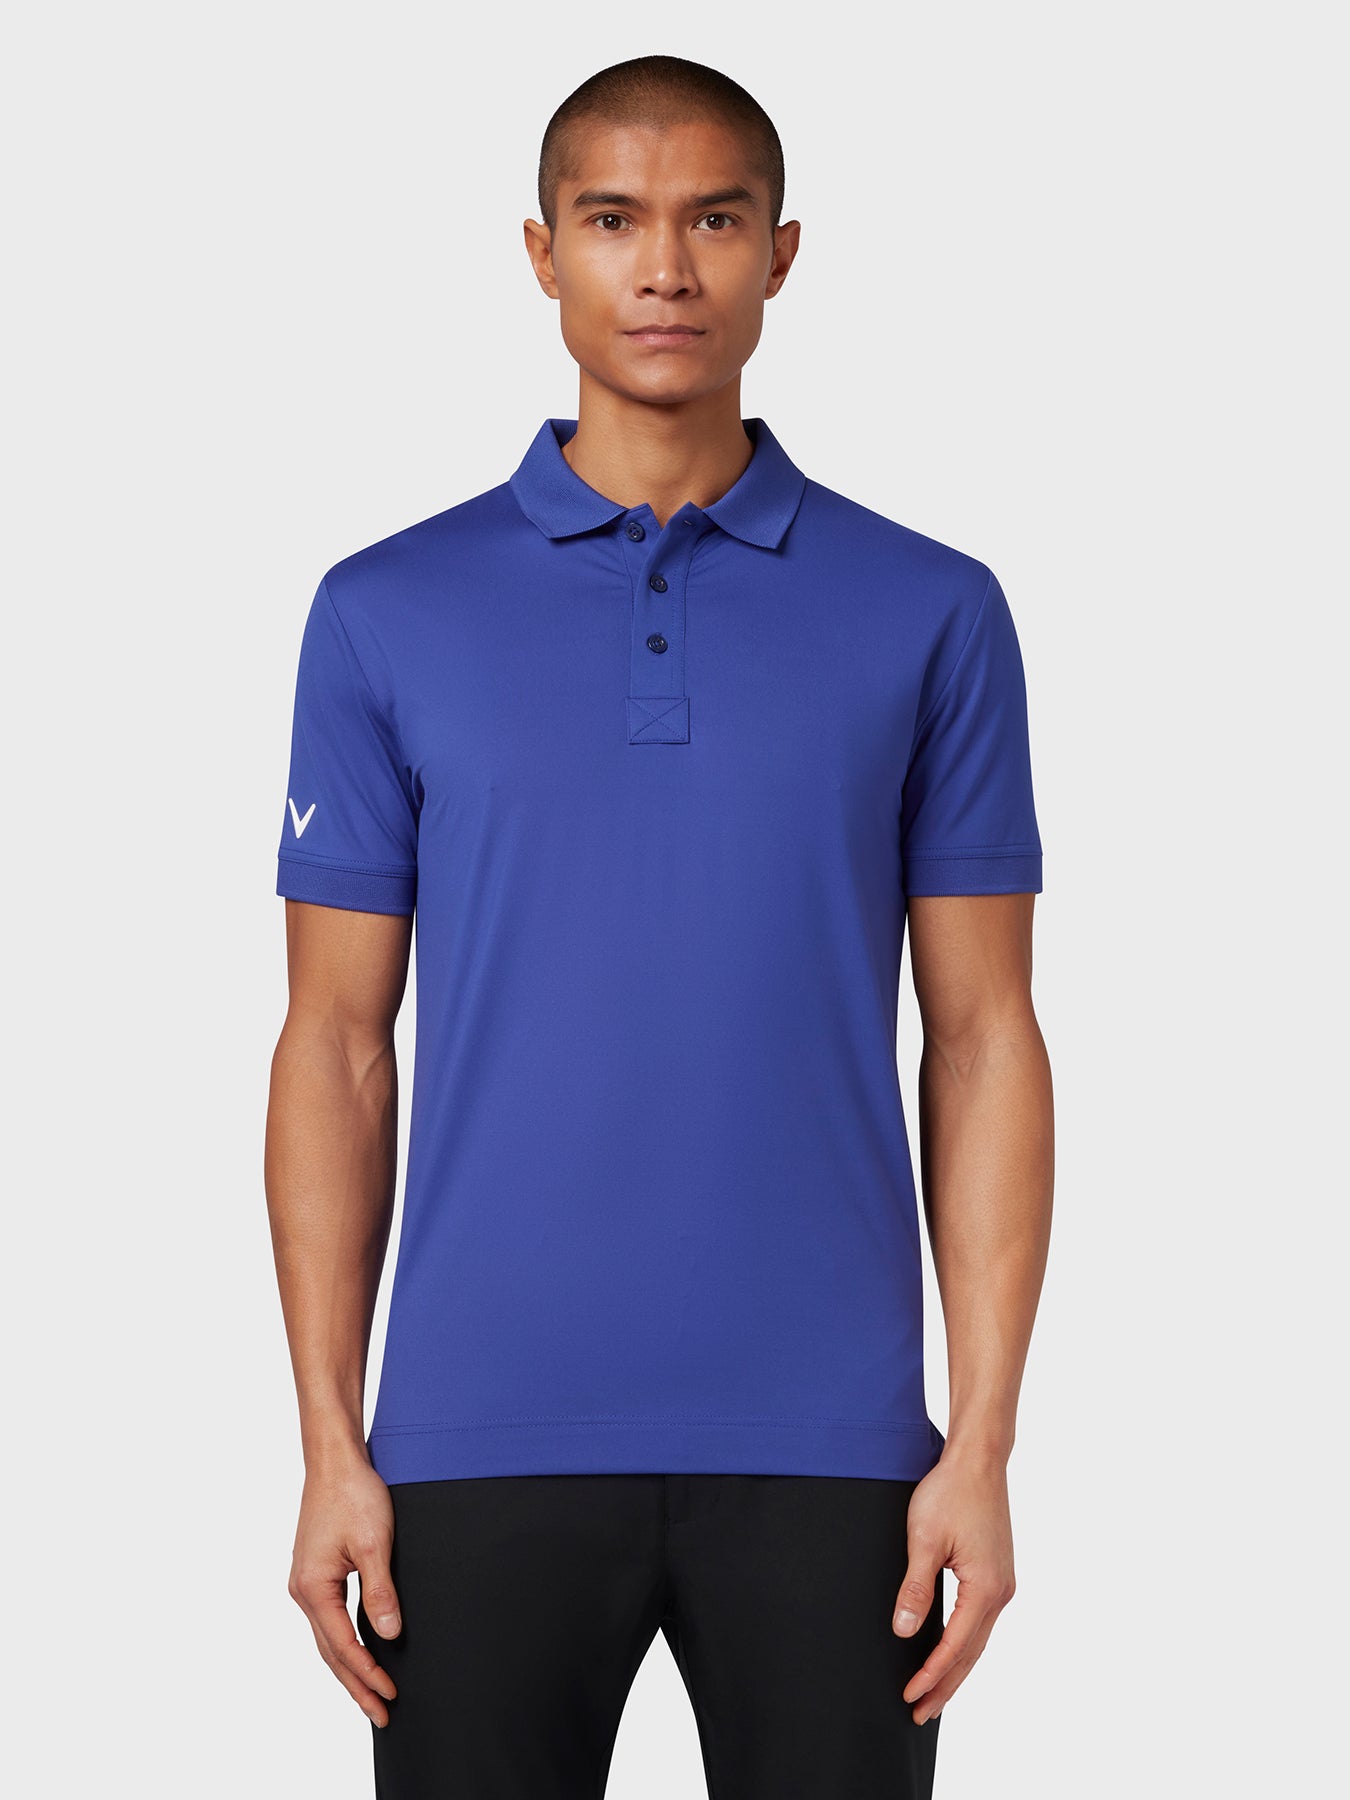 View X Series Solid Ribbed Polo In Clematis Blue Clematis Blue XXXL information